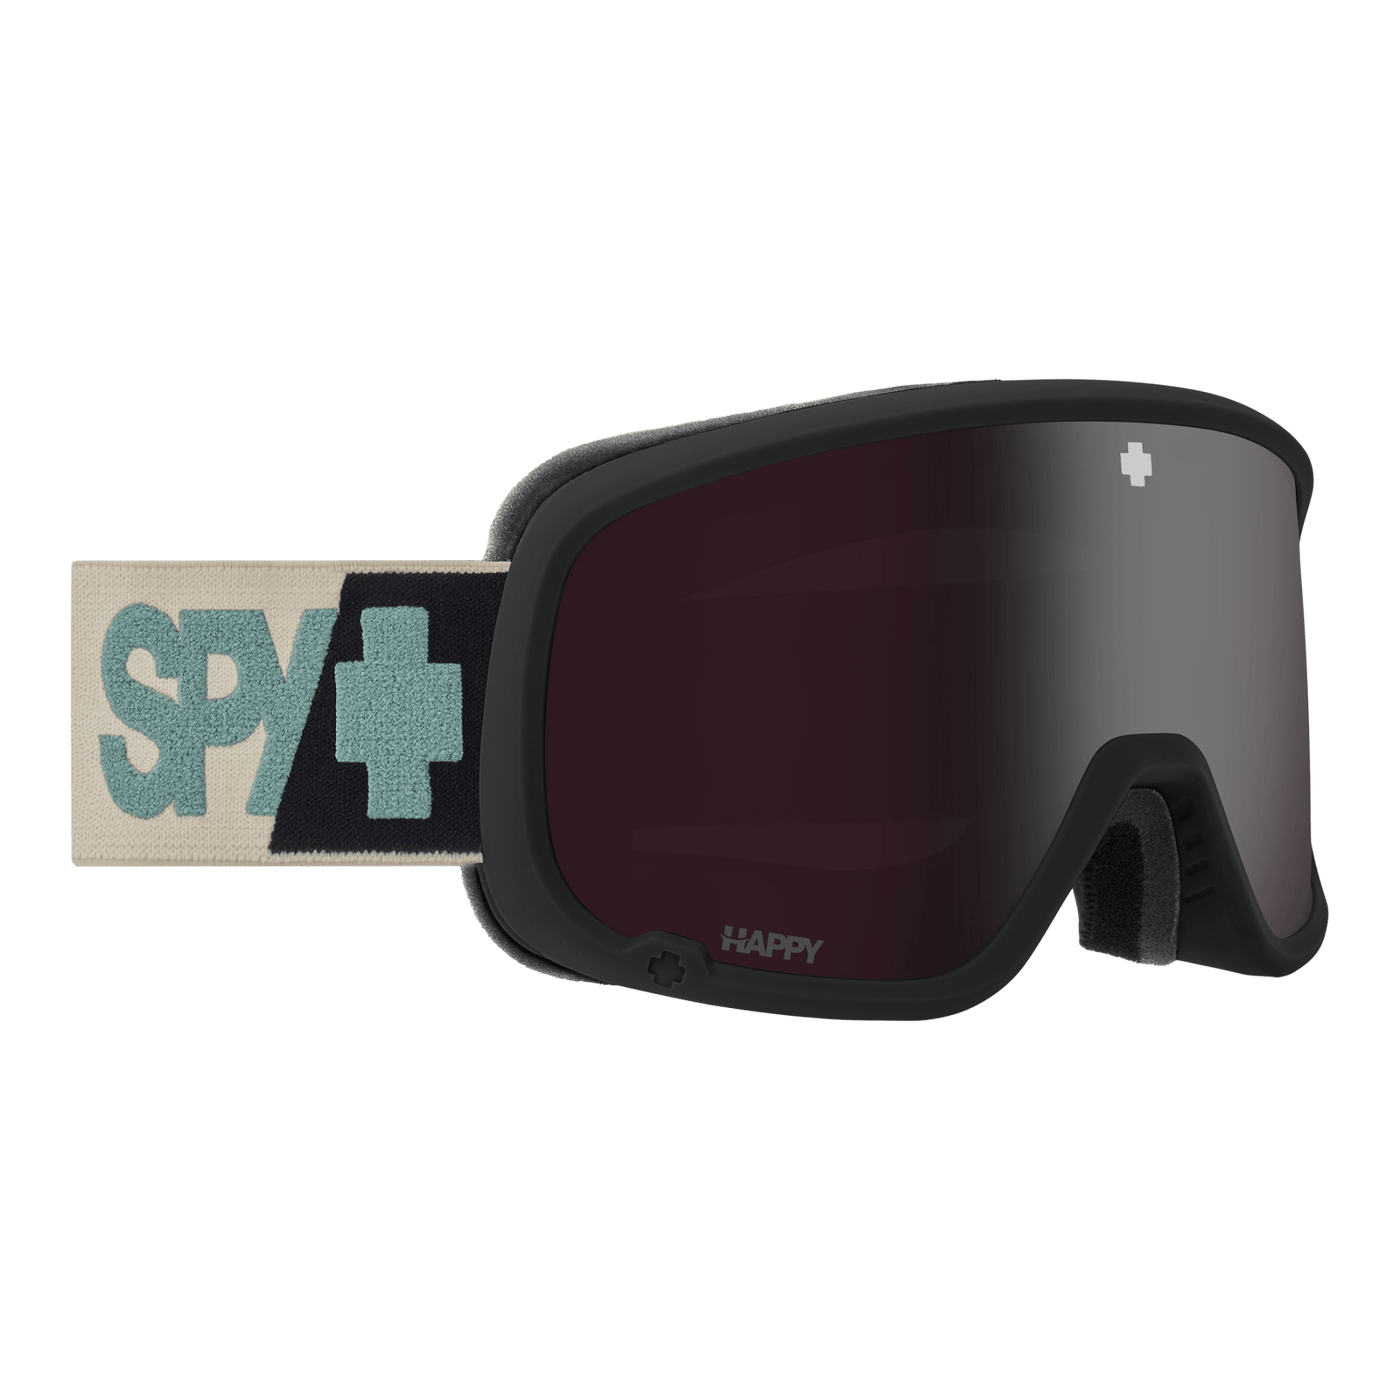 SPY Marshall 2.0 Snow Goggles - Warm Gray 8Lines Shop - Fast Shipping